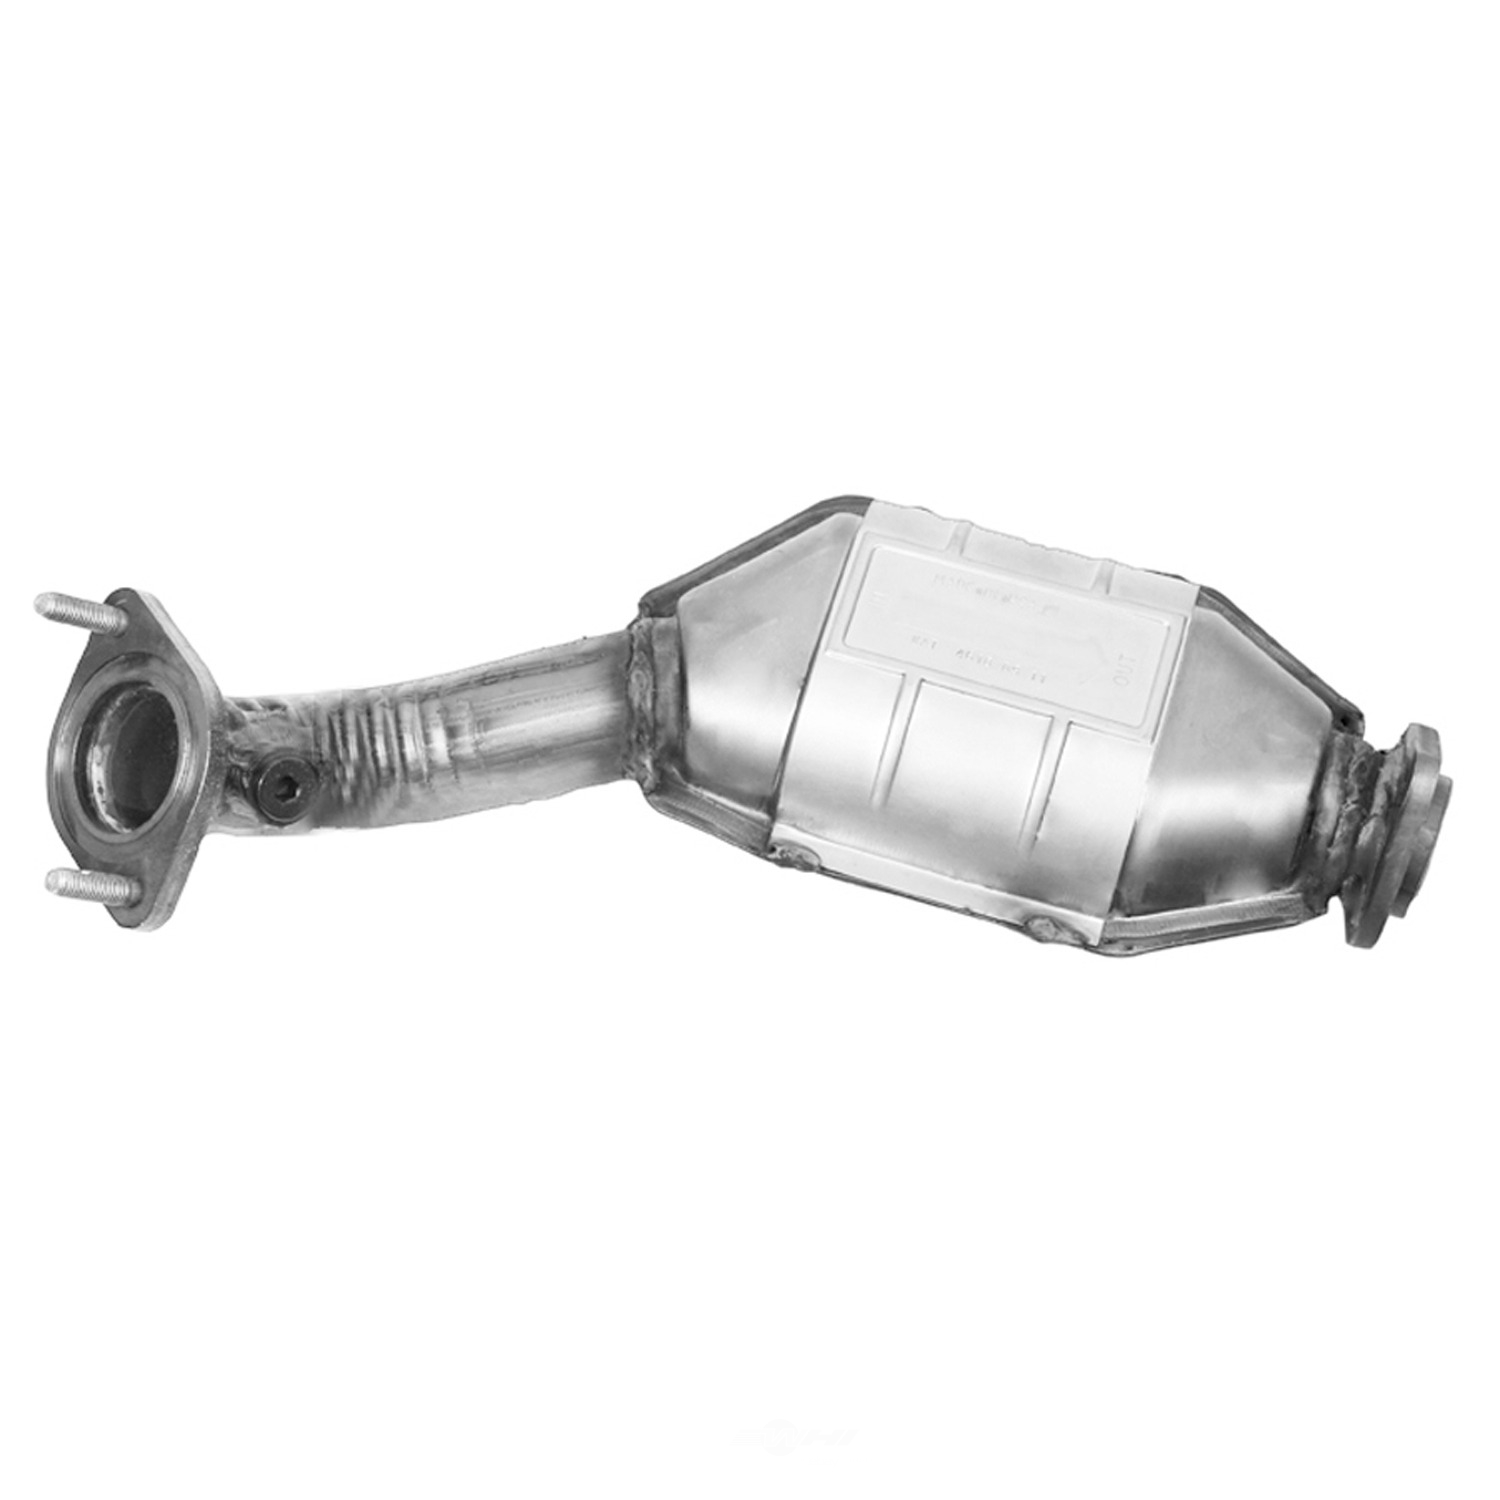 AP EXHAUST FEDERAL CONVERTER - Direct Fit Converter - APG 642131